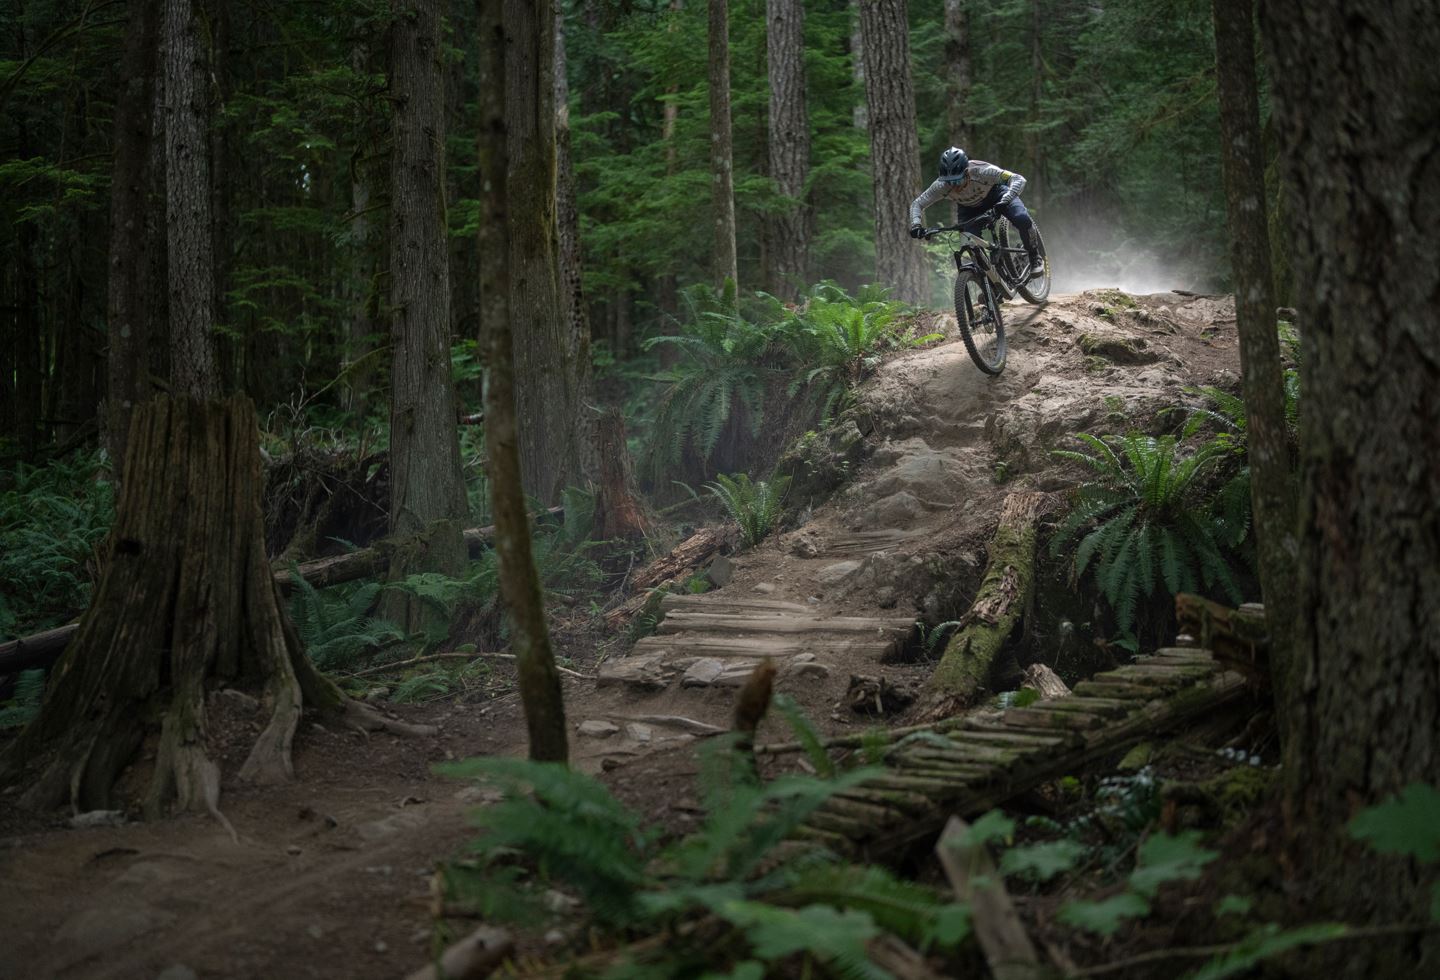 Mountain biker riding a rock face in the forest